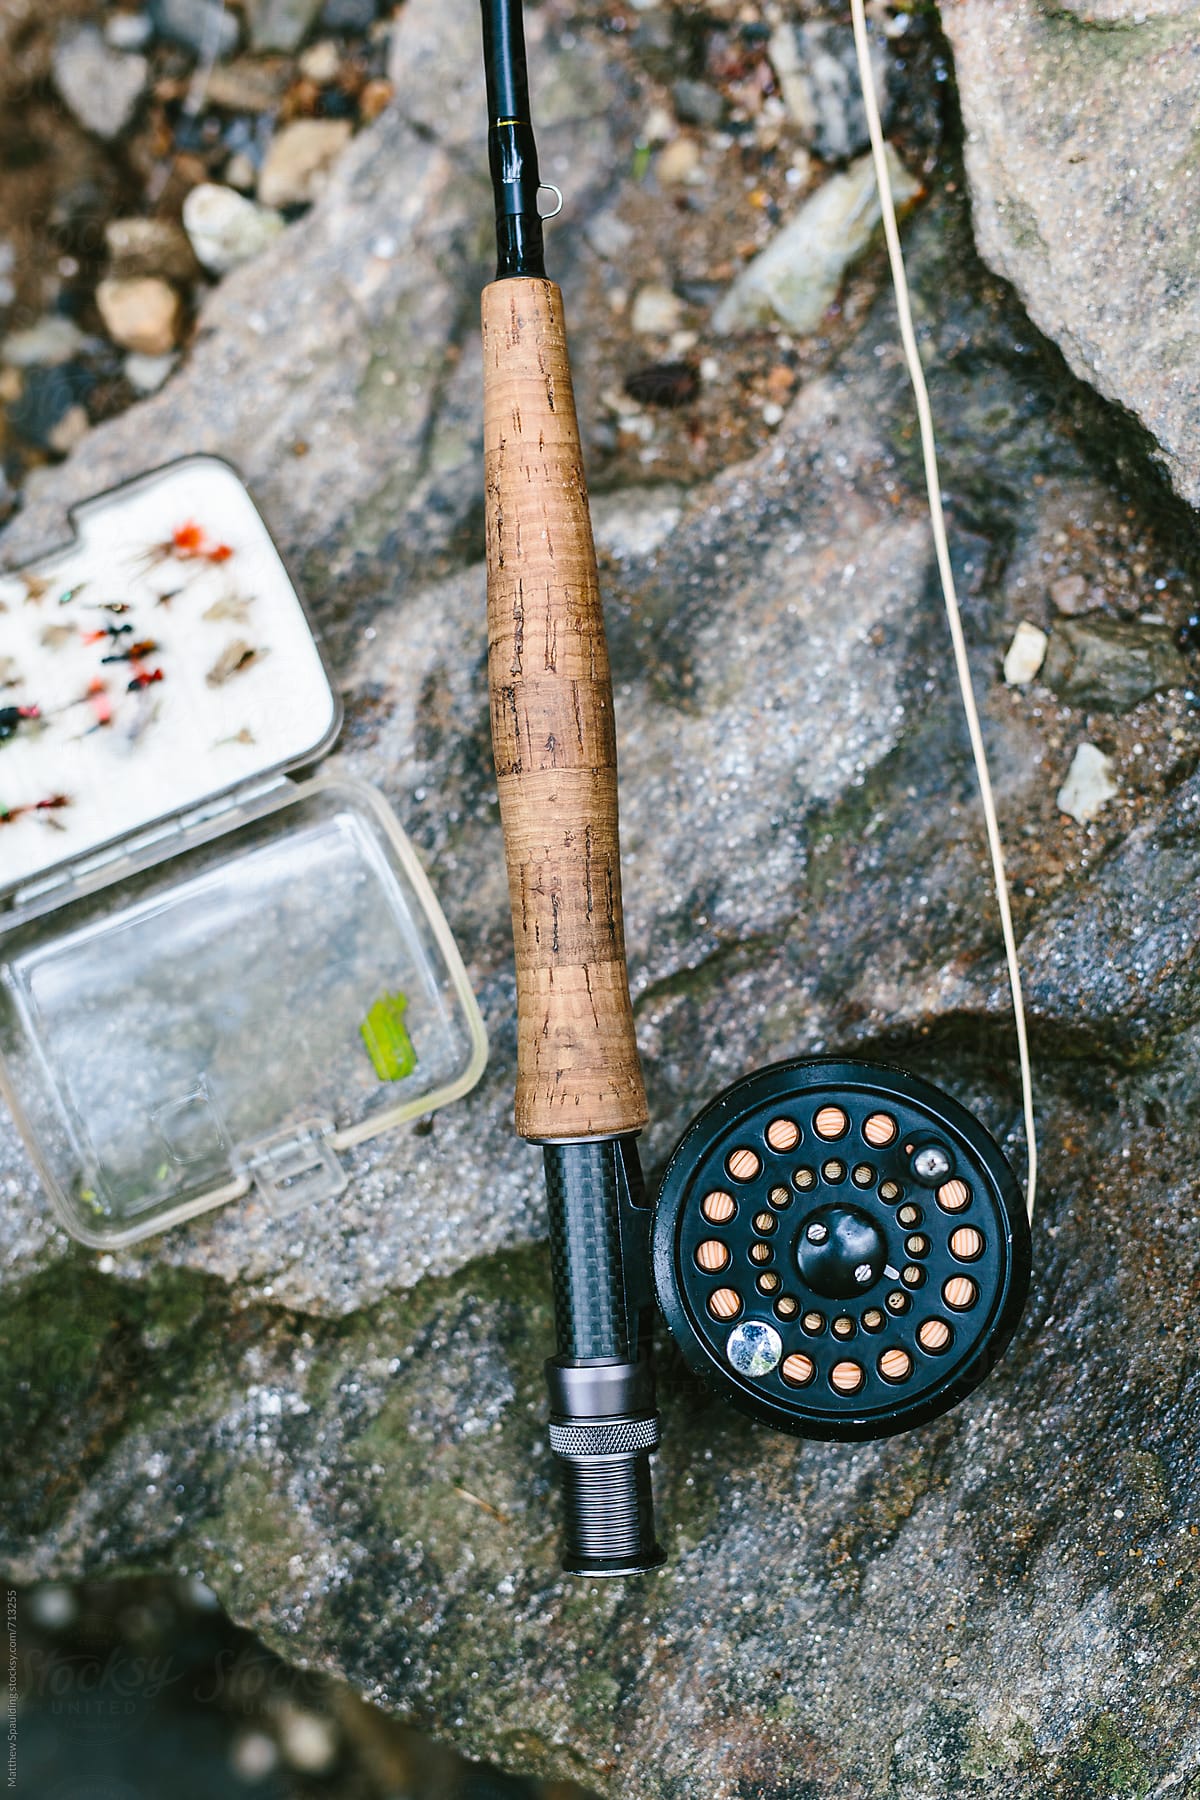 Fly fishing rod, reel and flies on river bank